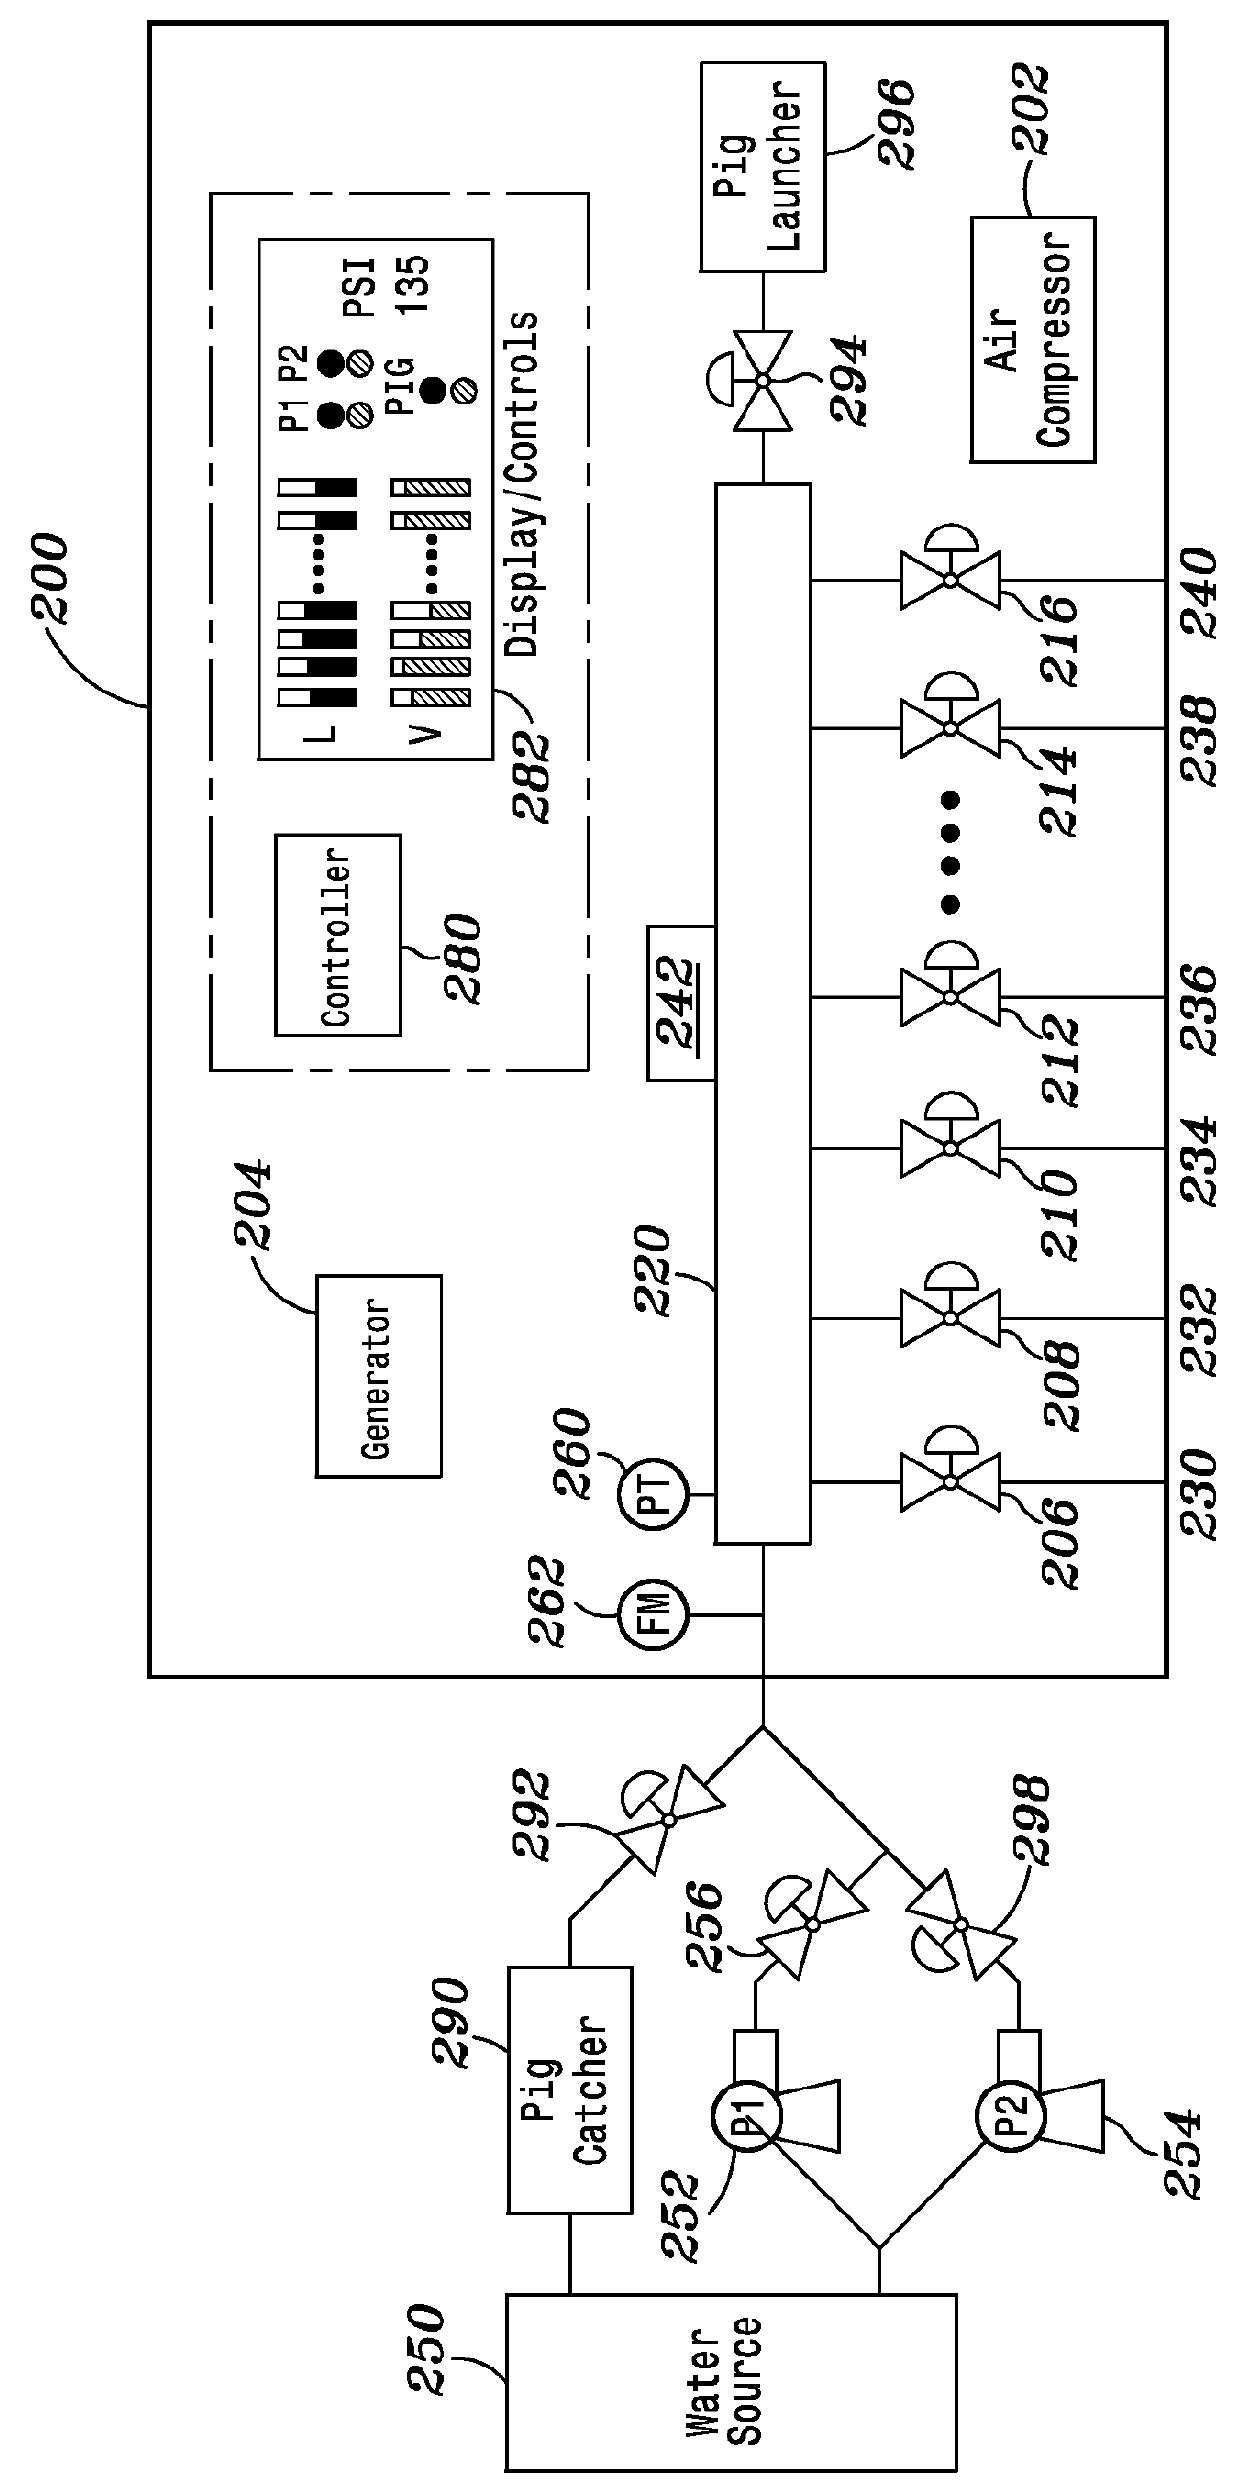 Automated system for monitoring and controlling water transfer during hydraulic fracturing